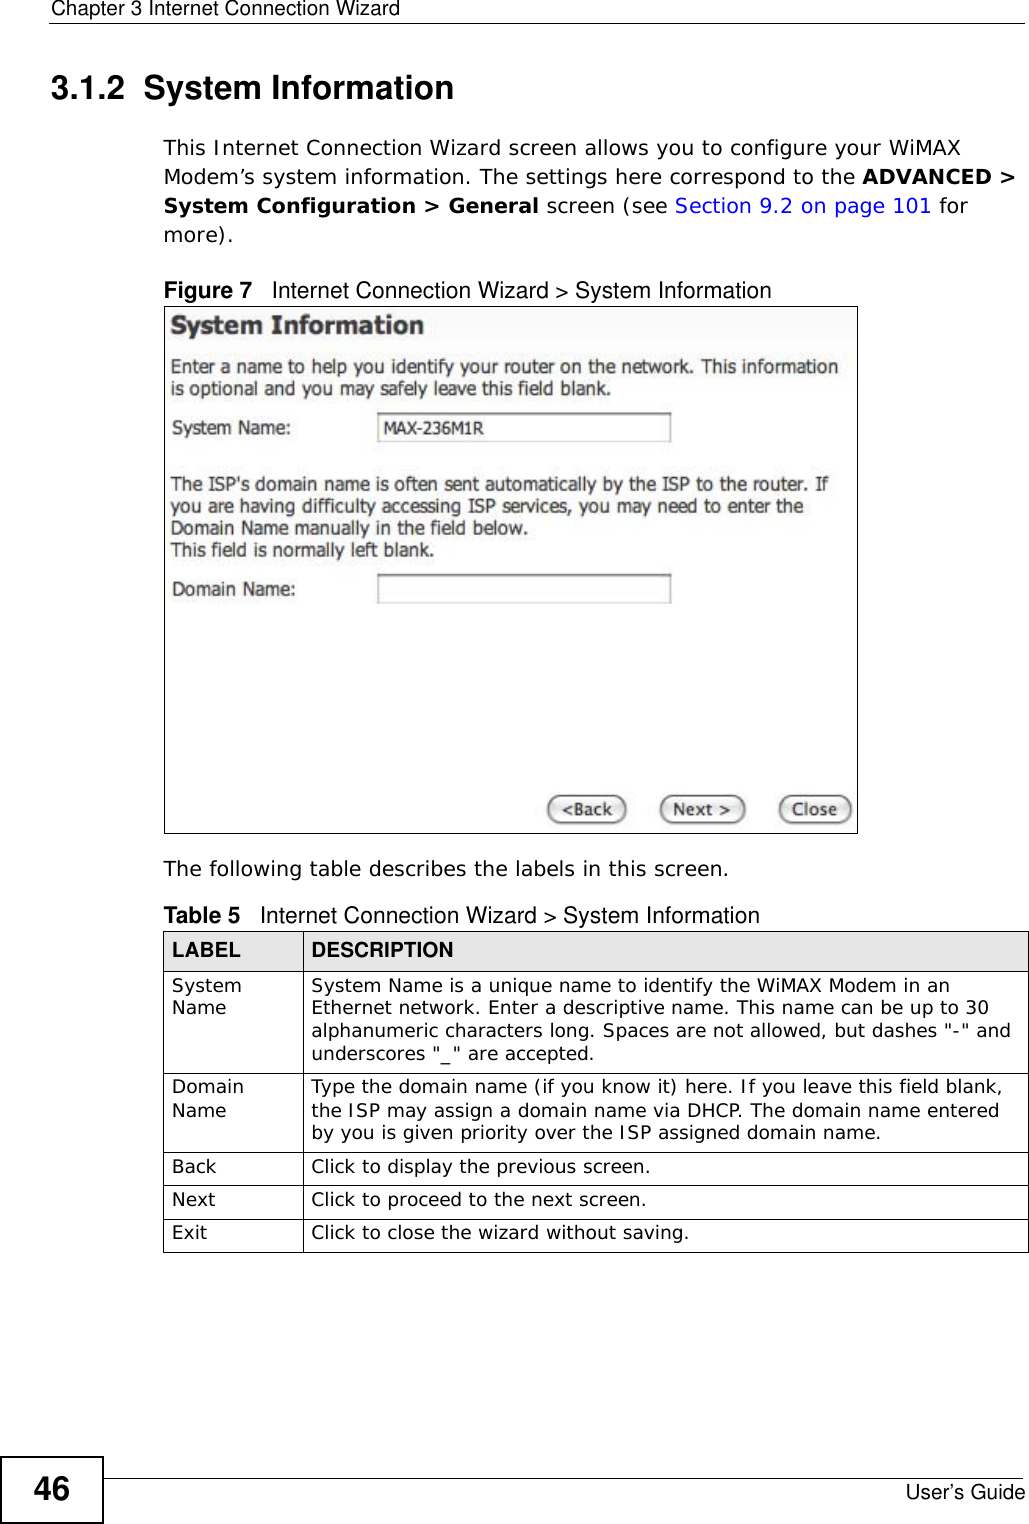 Chapter 3 Internet Connection WizardUser’s Guide463.1.2  System InformationThis Internet Connection Wizard screen allows you to configure your WiMAX Modem’s system information. The settings here correspond to the ADVANCED &gt; System Configuration &gt; General screen (see Section 9.2 on page 101 for more).Figure 7   Internet Connection Wizard &gt; System InformationThe following table describes the labels in this screen.Table 5   Internet Connection Wizard &gt; System InformationLABEL DESCRIPTIONSystem Name System Name is a unique name to identify the WiMAX Modem in an Ethernet network. Enter a descriptive name. This name can be up to 30 alphanumeric characters long. Spaces are not allowed, but dashes &quot;-&quot; and underscores &quot;_&quot; are accepted. Domain Name Type the domain name (if you know it) here. If you leave this field blank, the ISP may assign a domain name via DHCP. The domain name entered by you is given priority over the ISP assigned domain name.Back Click to display the previous screen.Next Click to proceed to the next screen. Exit Click to close the wizard without saving.